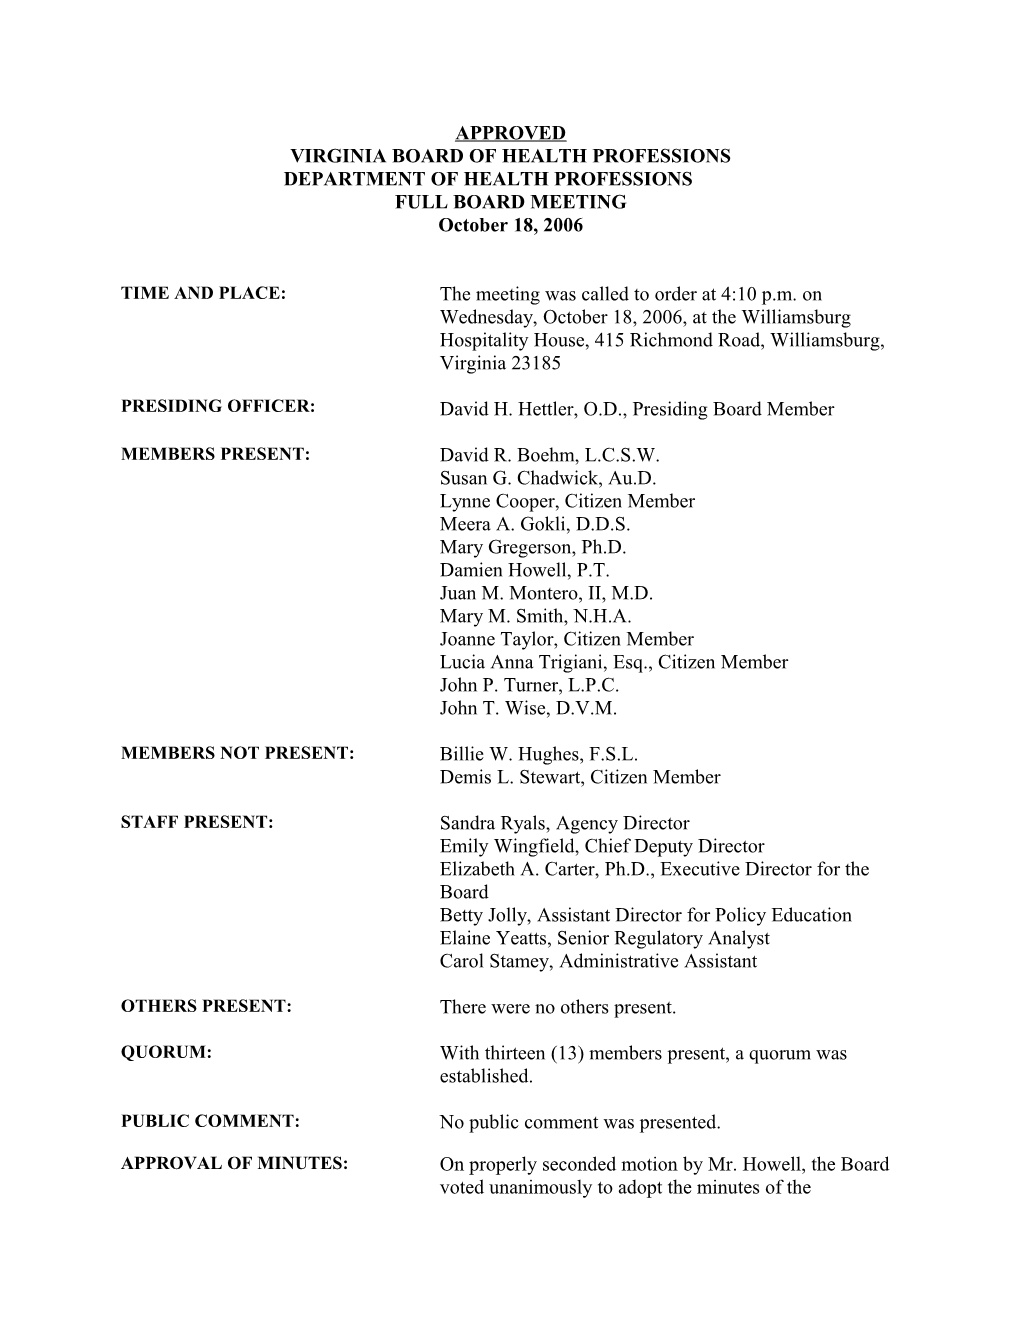 VIRGINIA BOARD of HEALTH PROFESSIONS 10-18-2006 Meeting Minutes